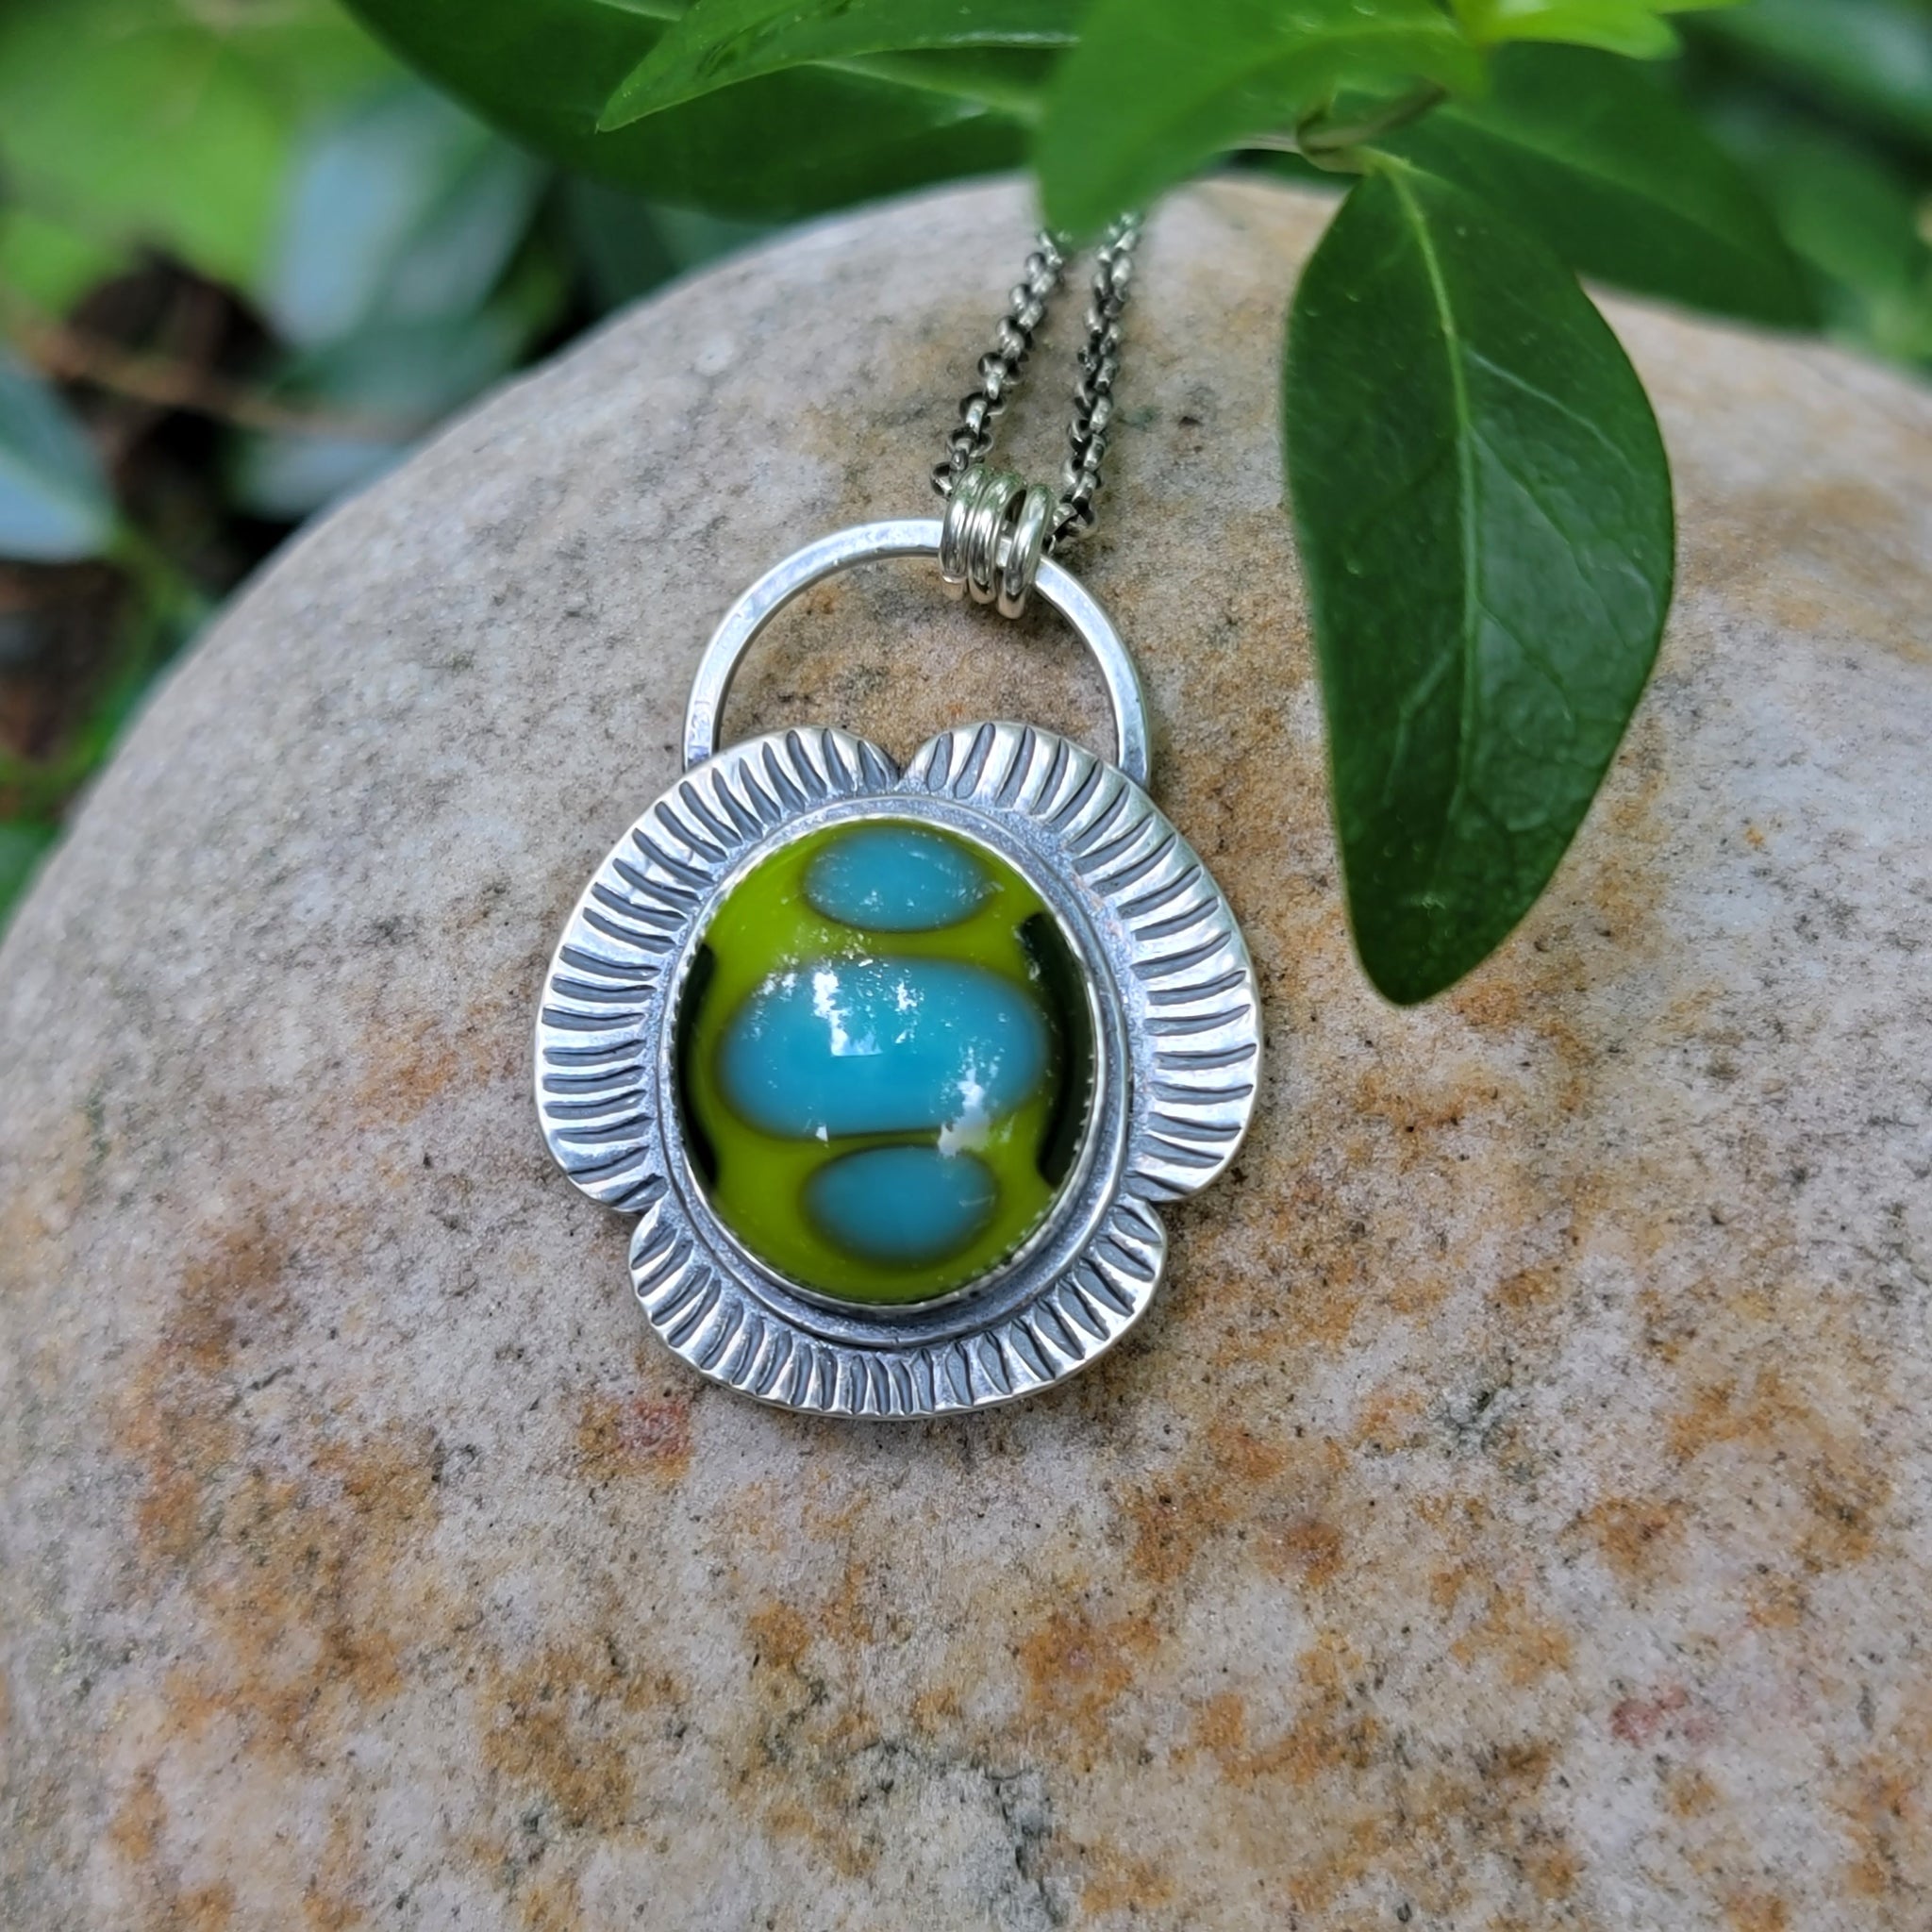 Colorific Lily Pad Green & Turquoise Fused Glass & Sterling Silver Pendant